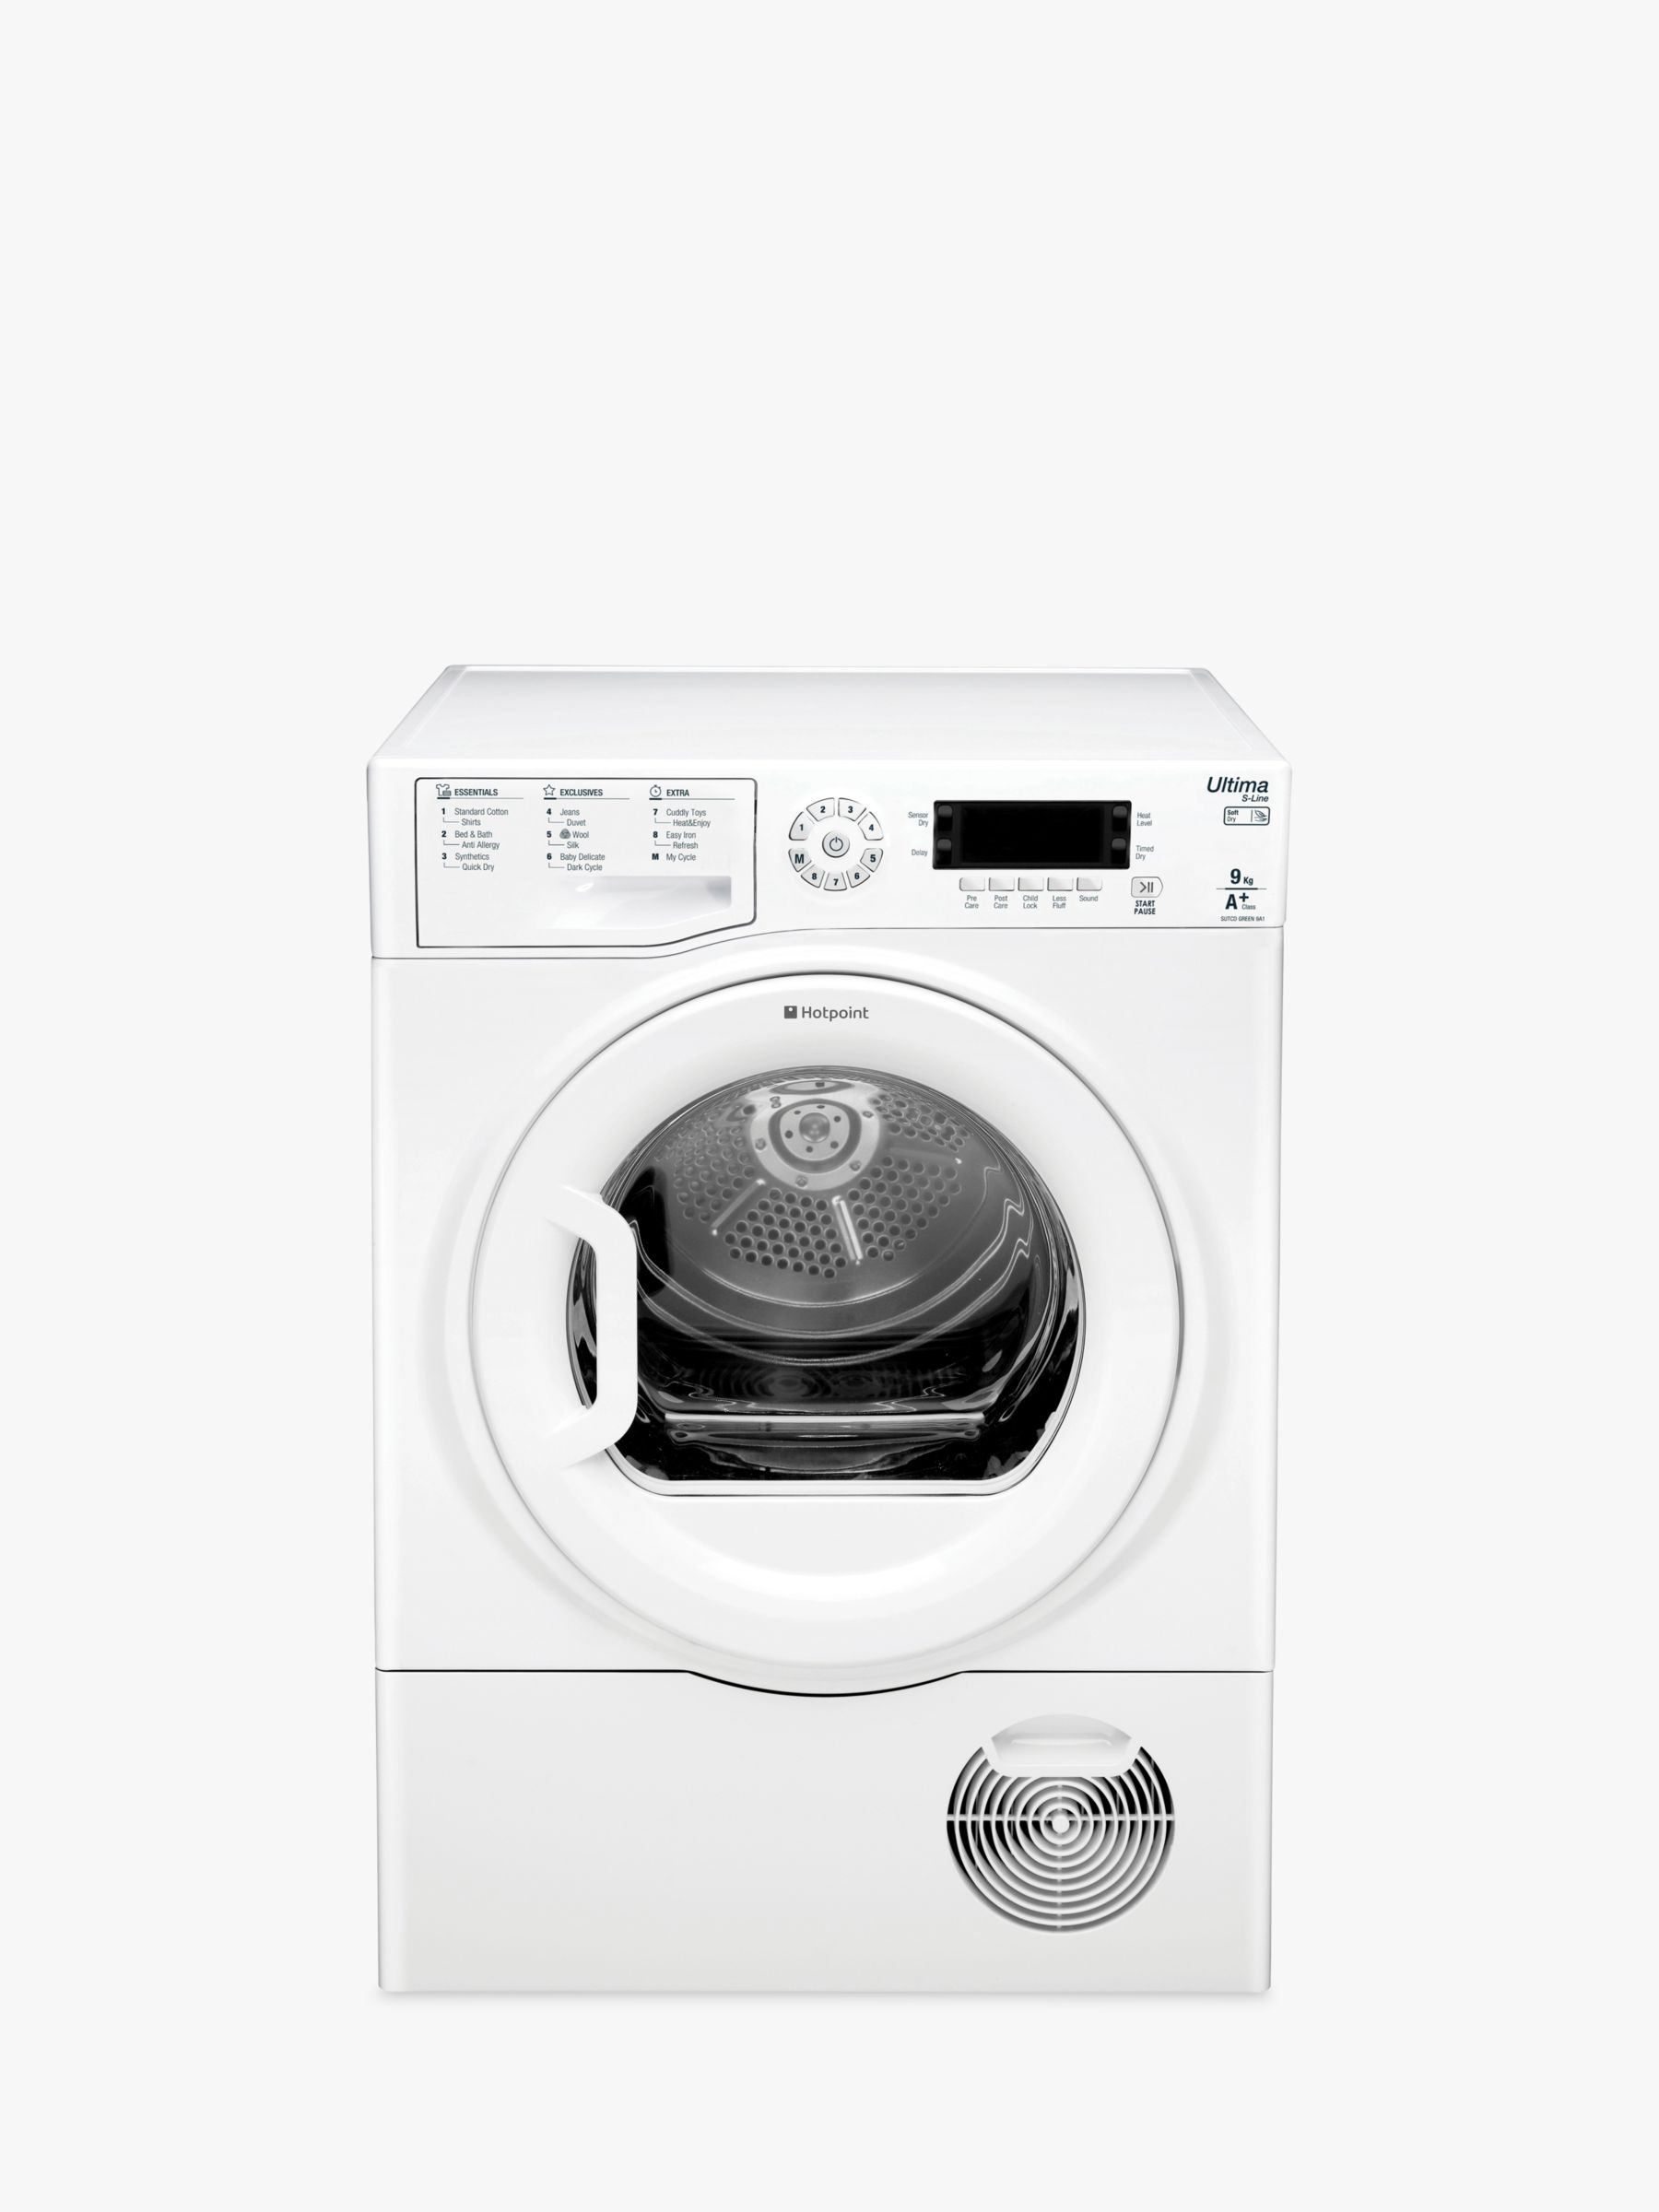 Hotpoint SUTCDGREEN9A1 Ultima Heat Pump Tumble Dryer, 9kg Load, A+ Energy Rating in White